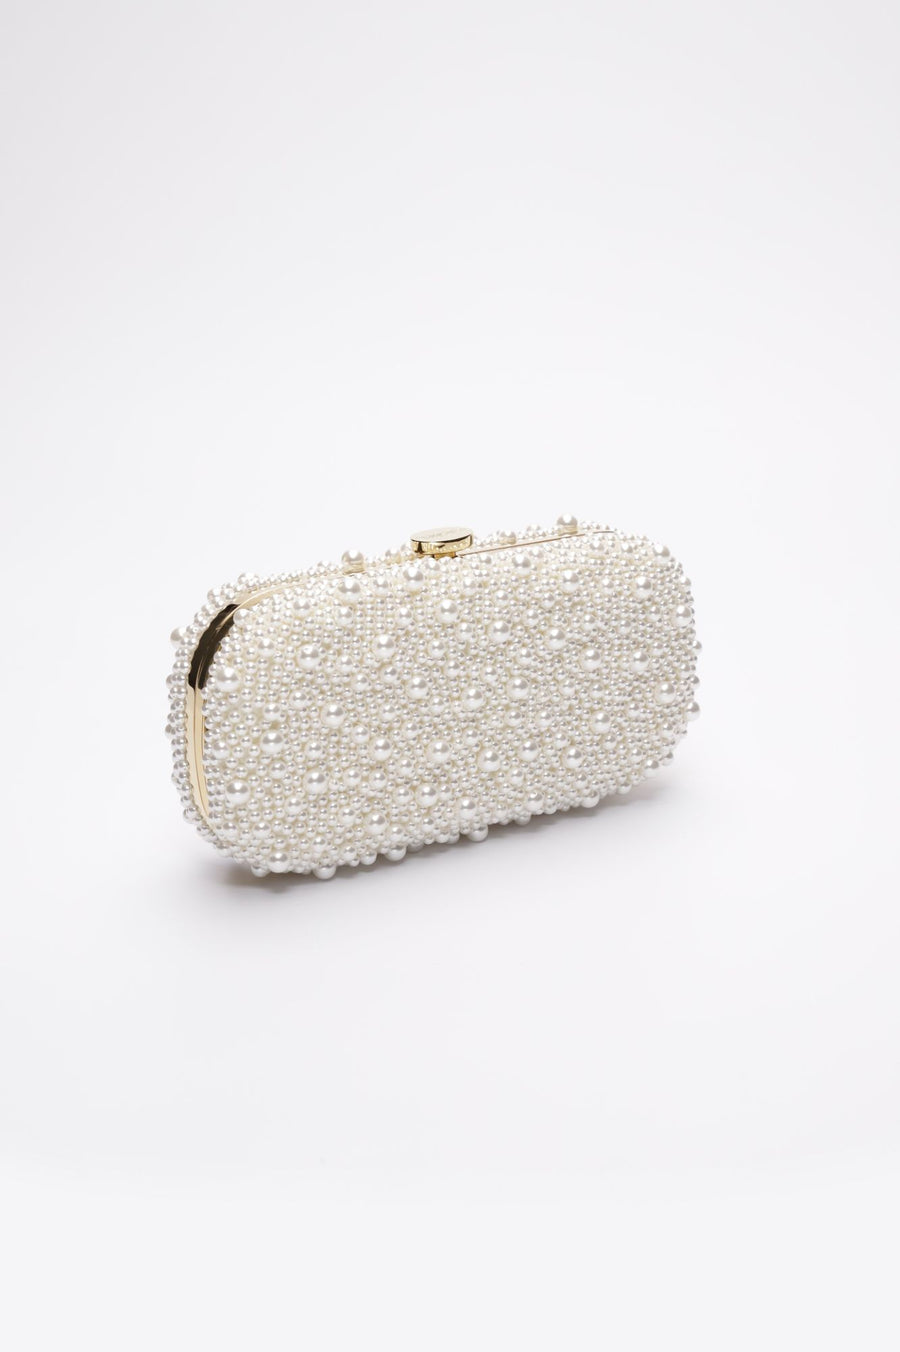 True Love Pearl Clutch with hand-sewn pearls with a gold hardware frame.